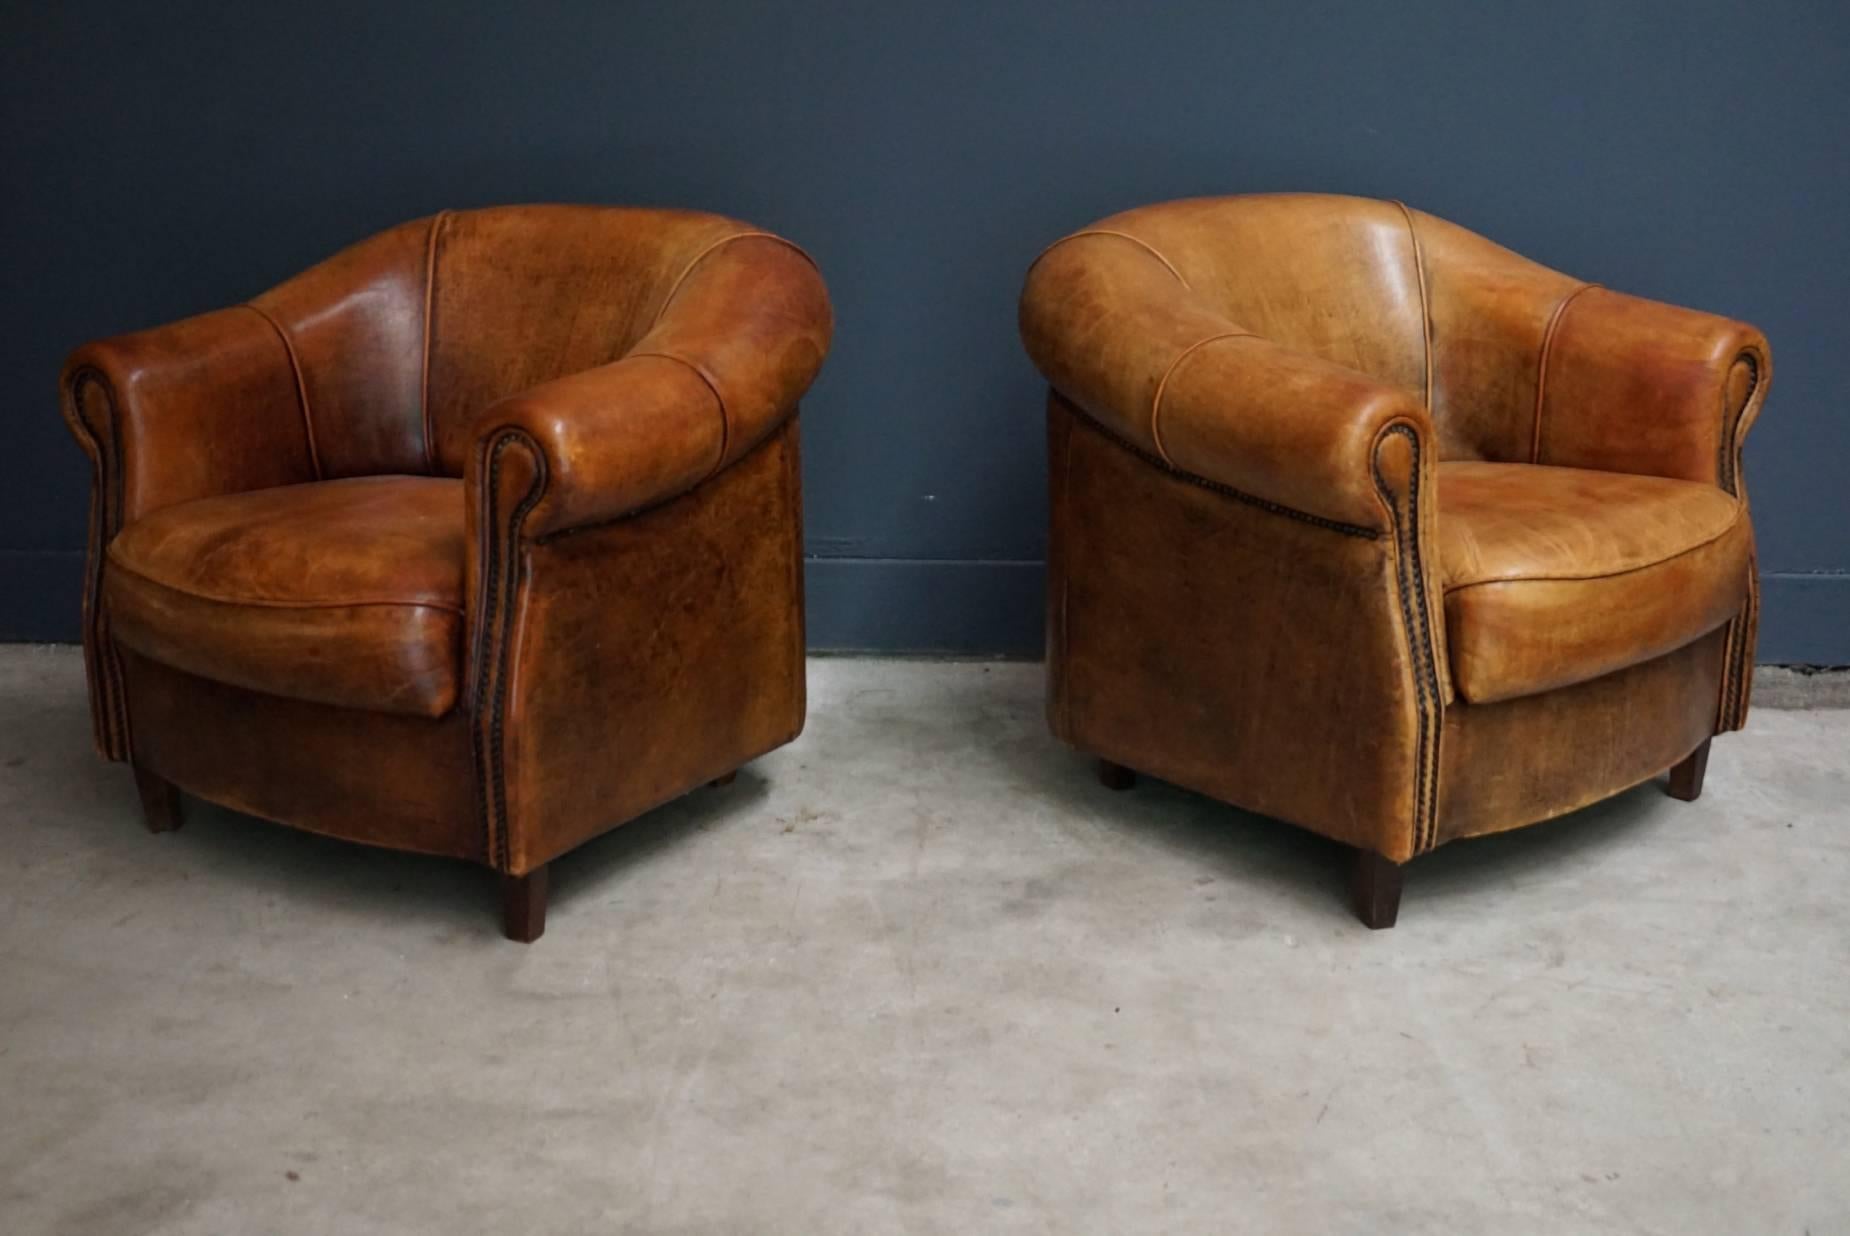 Vintage Dutch Cognac Leather Club Chairs, Set of Two 1